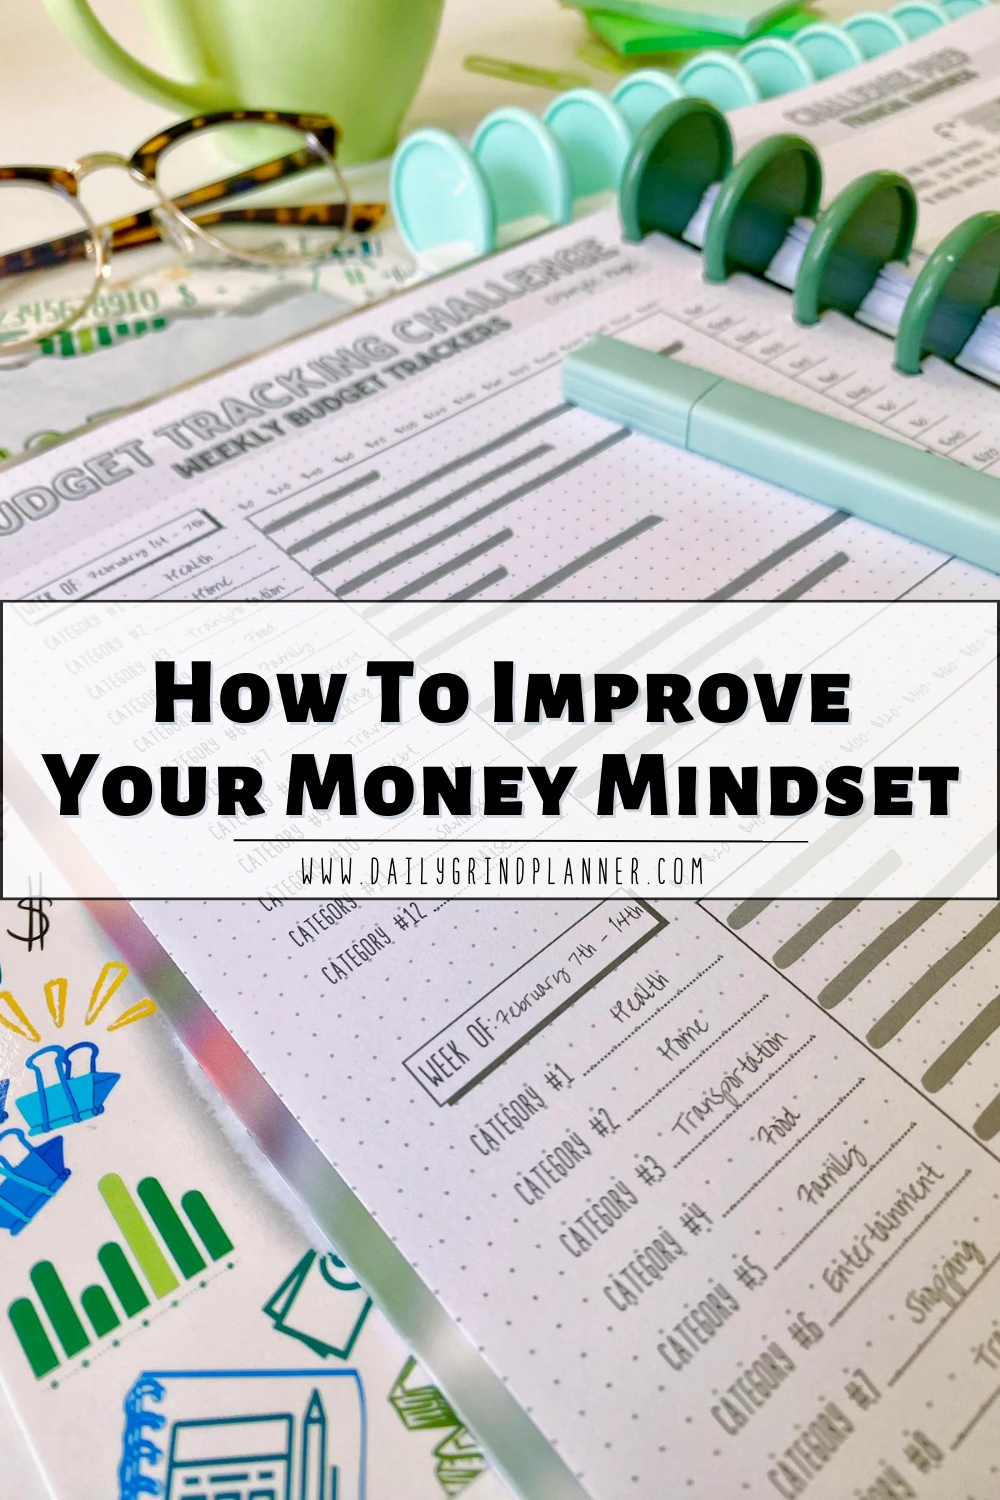 How to Improve Your Money Mindset